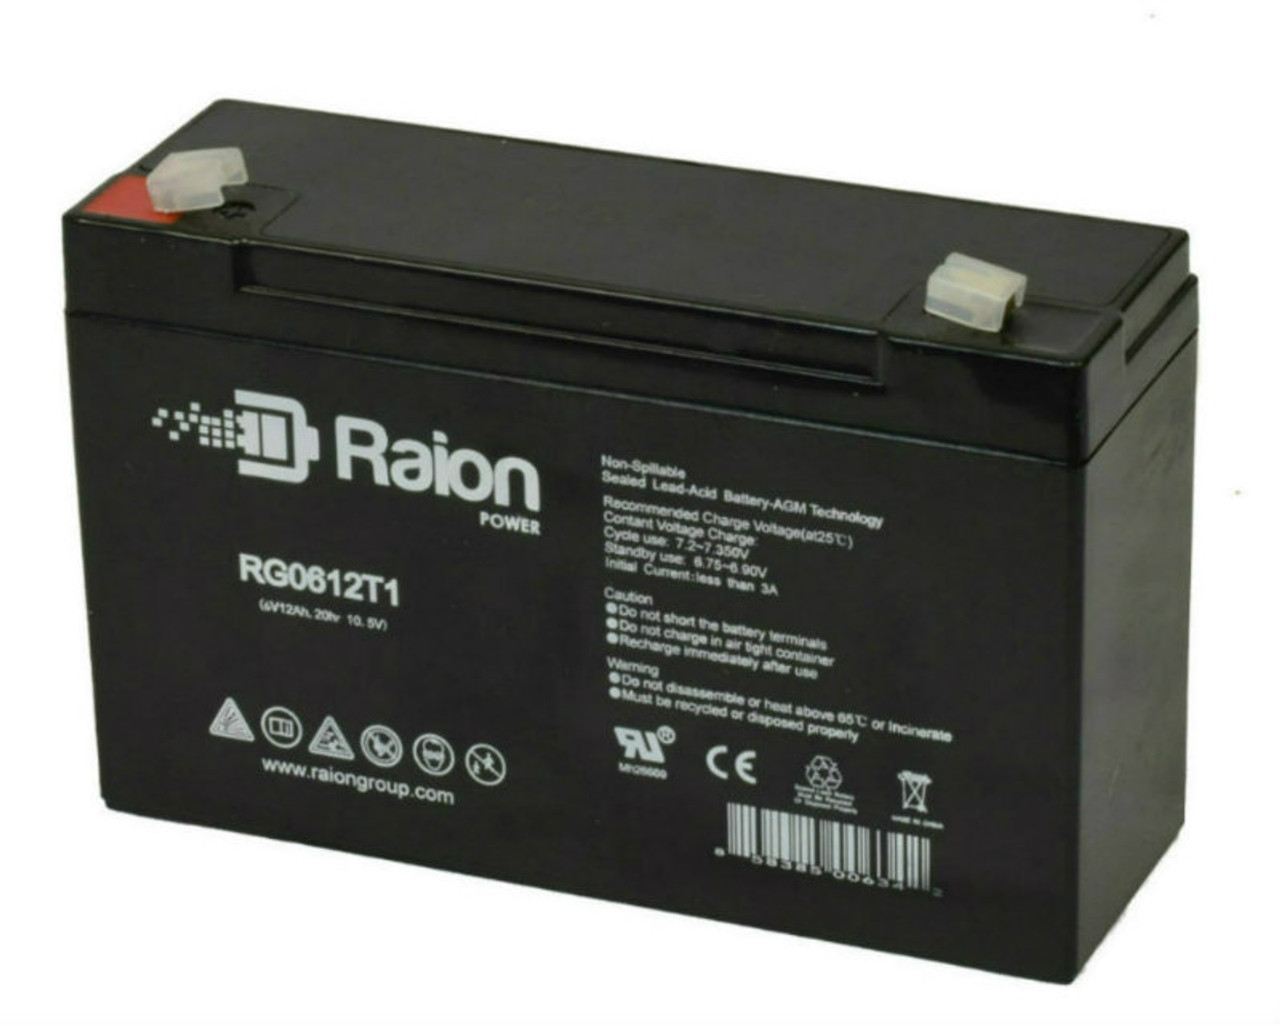 Raion Power RG06120T1 Replacement 6V 12Ah Emergency Light Battery for Siltron SPC19